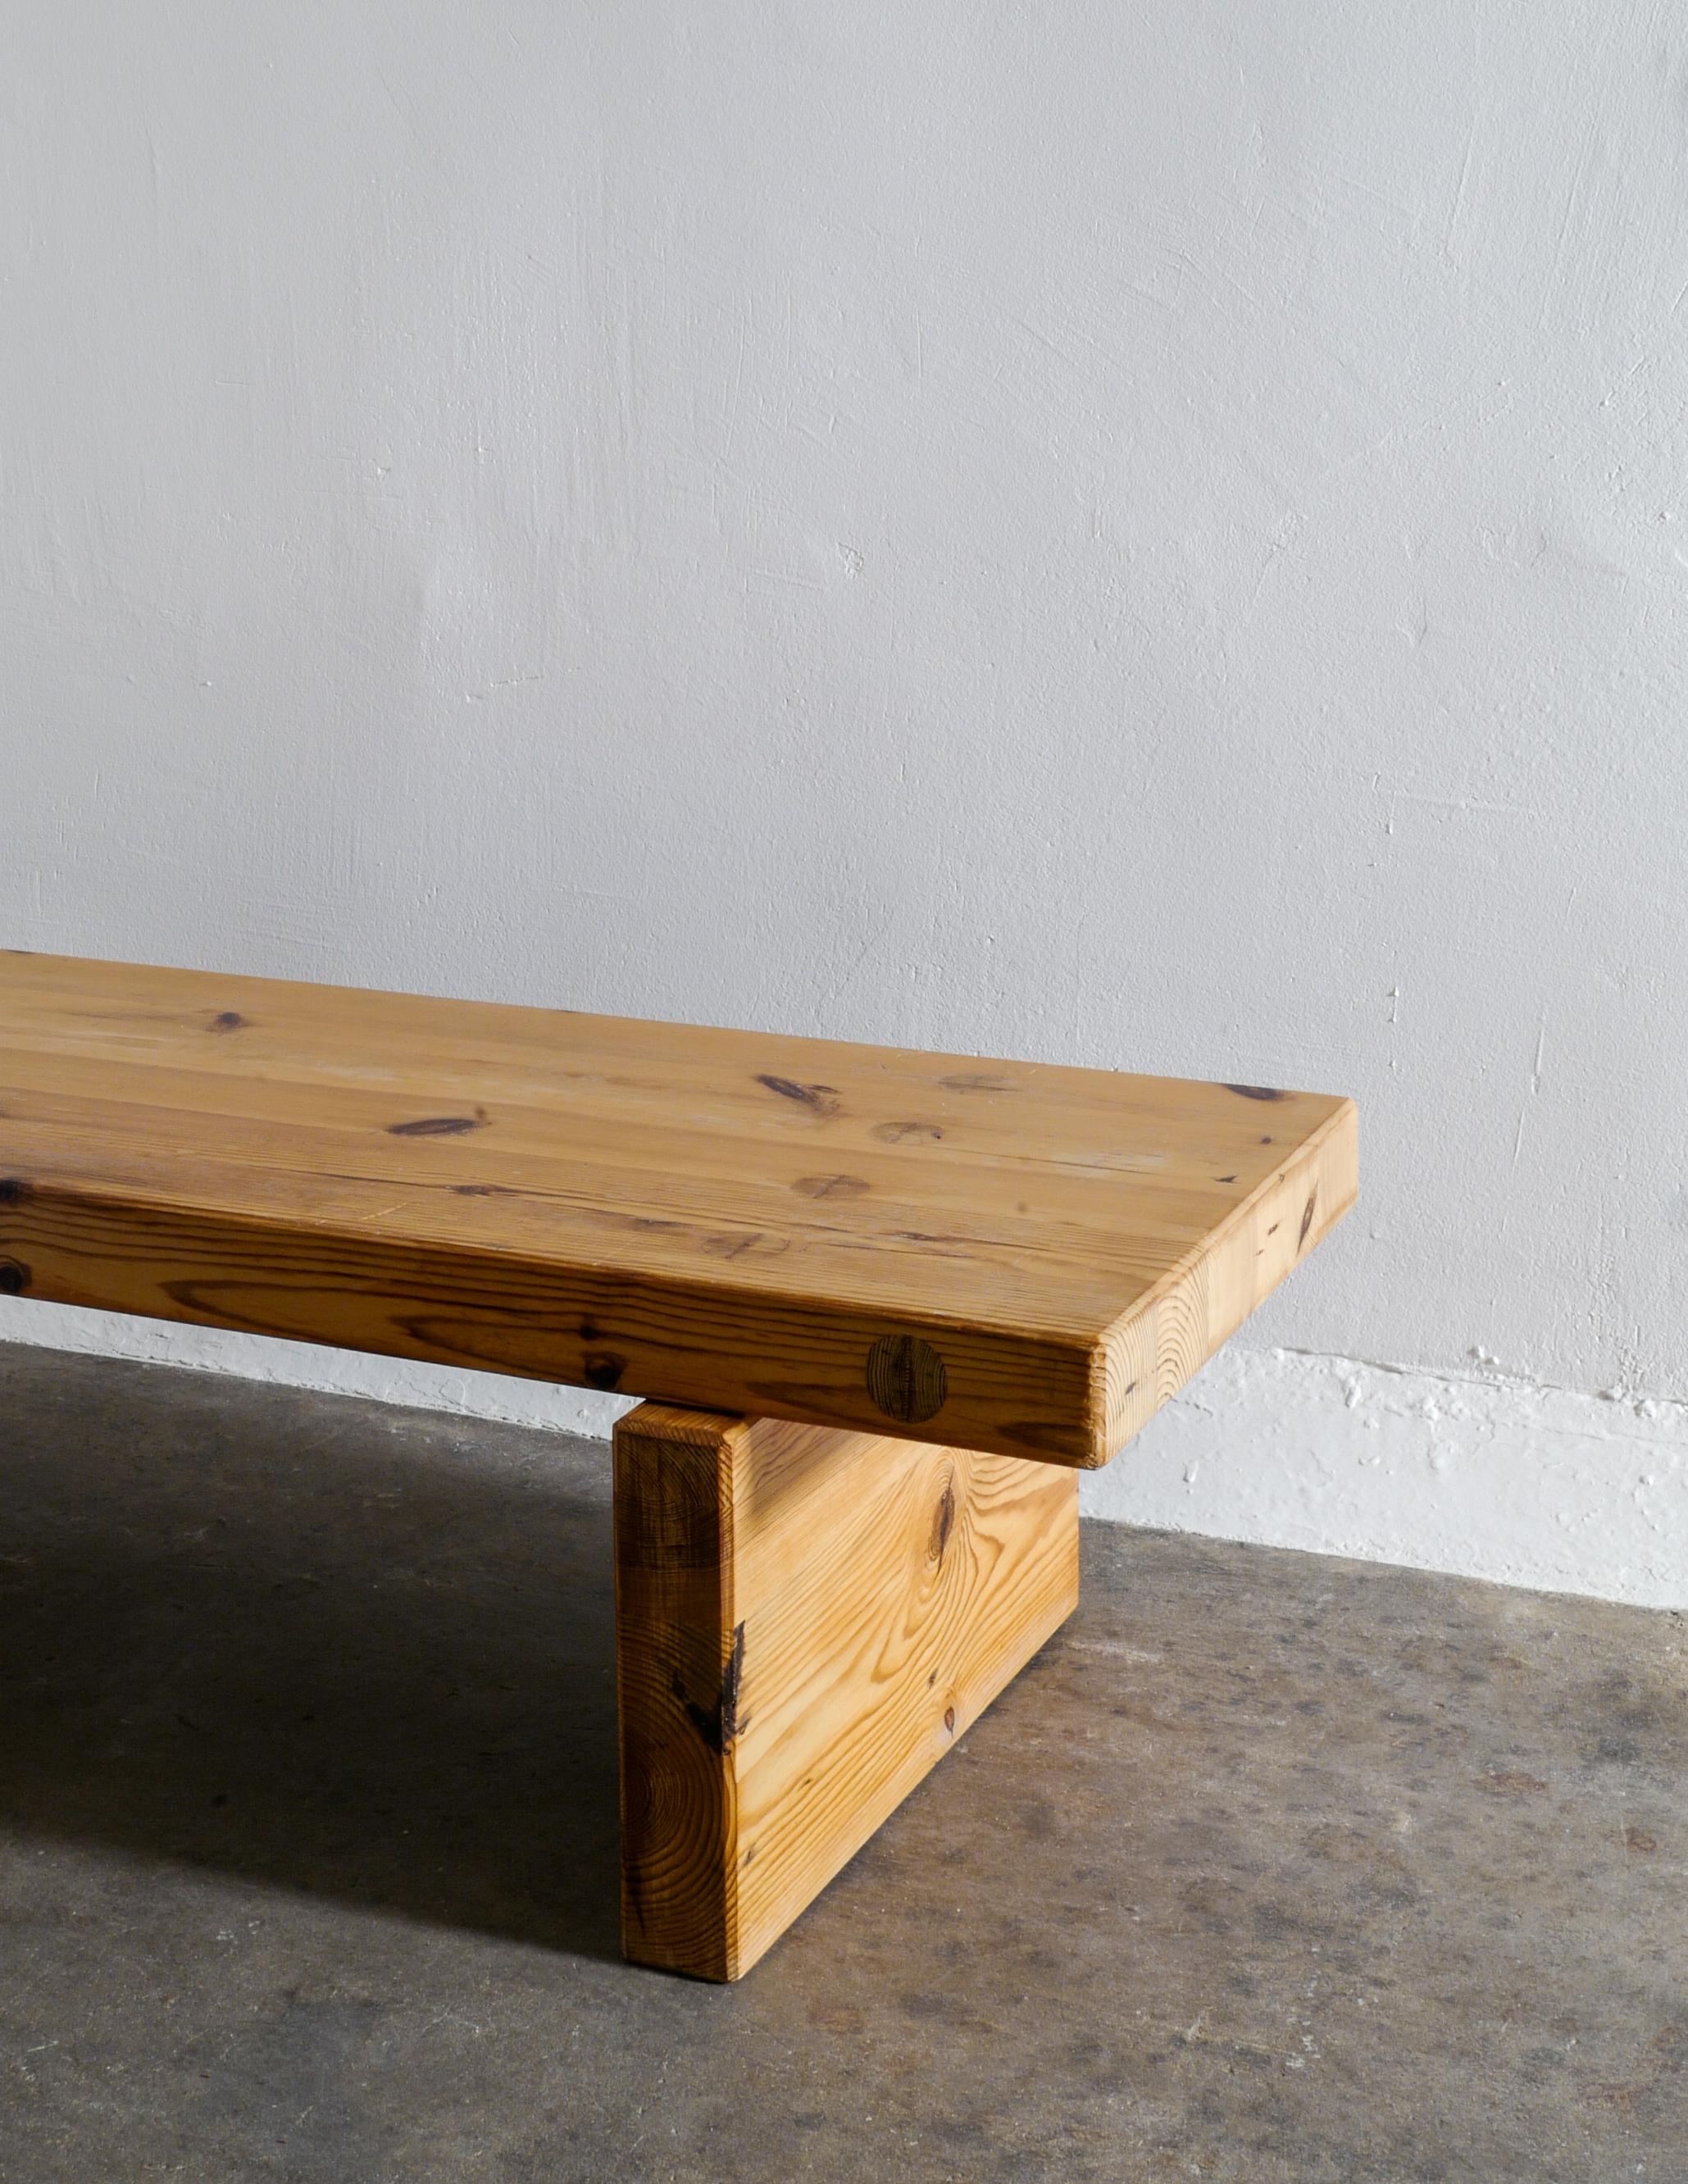 Swedish Midcentury Pine Bench Table by Roland Wilhelmsson Produced in Sweden, 1970s